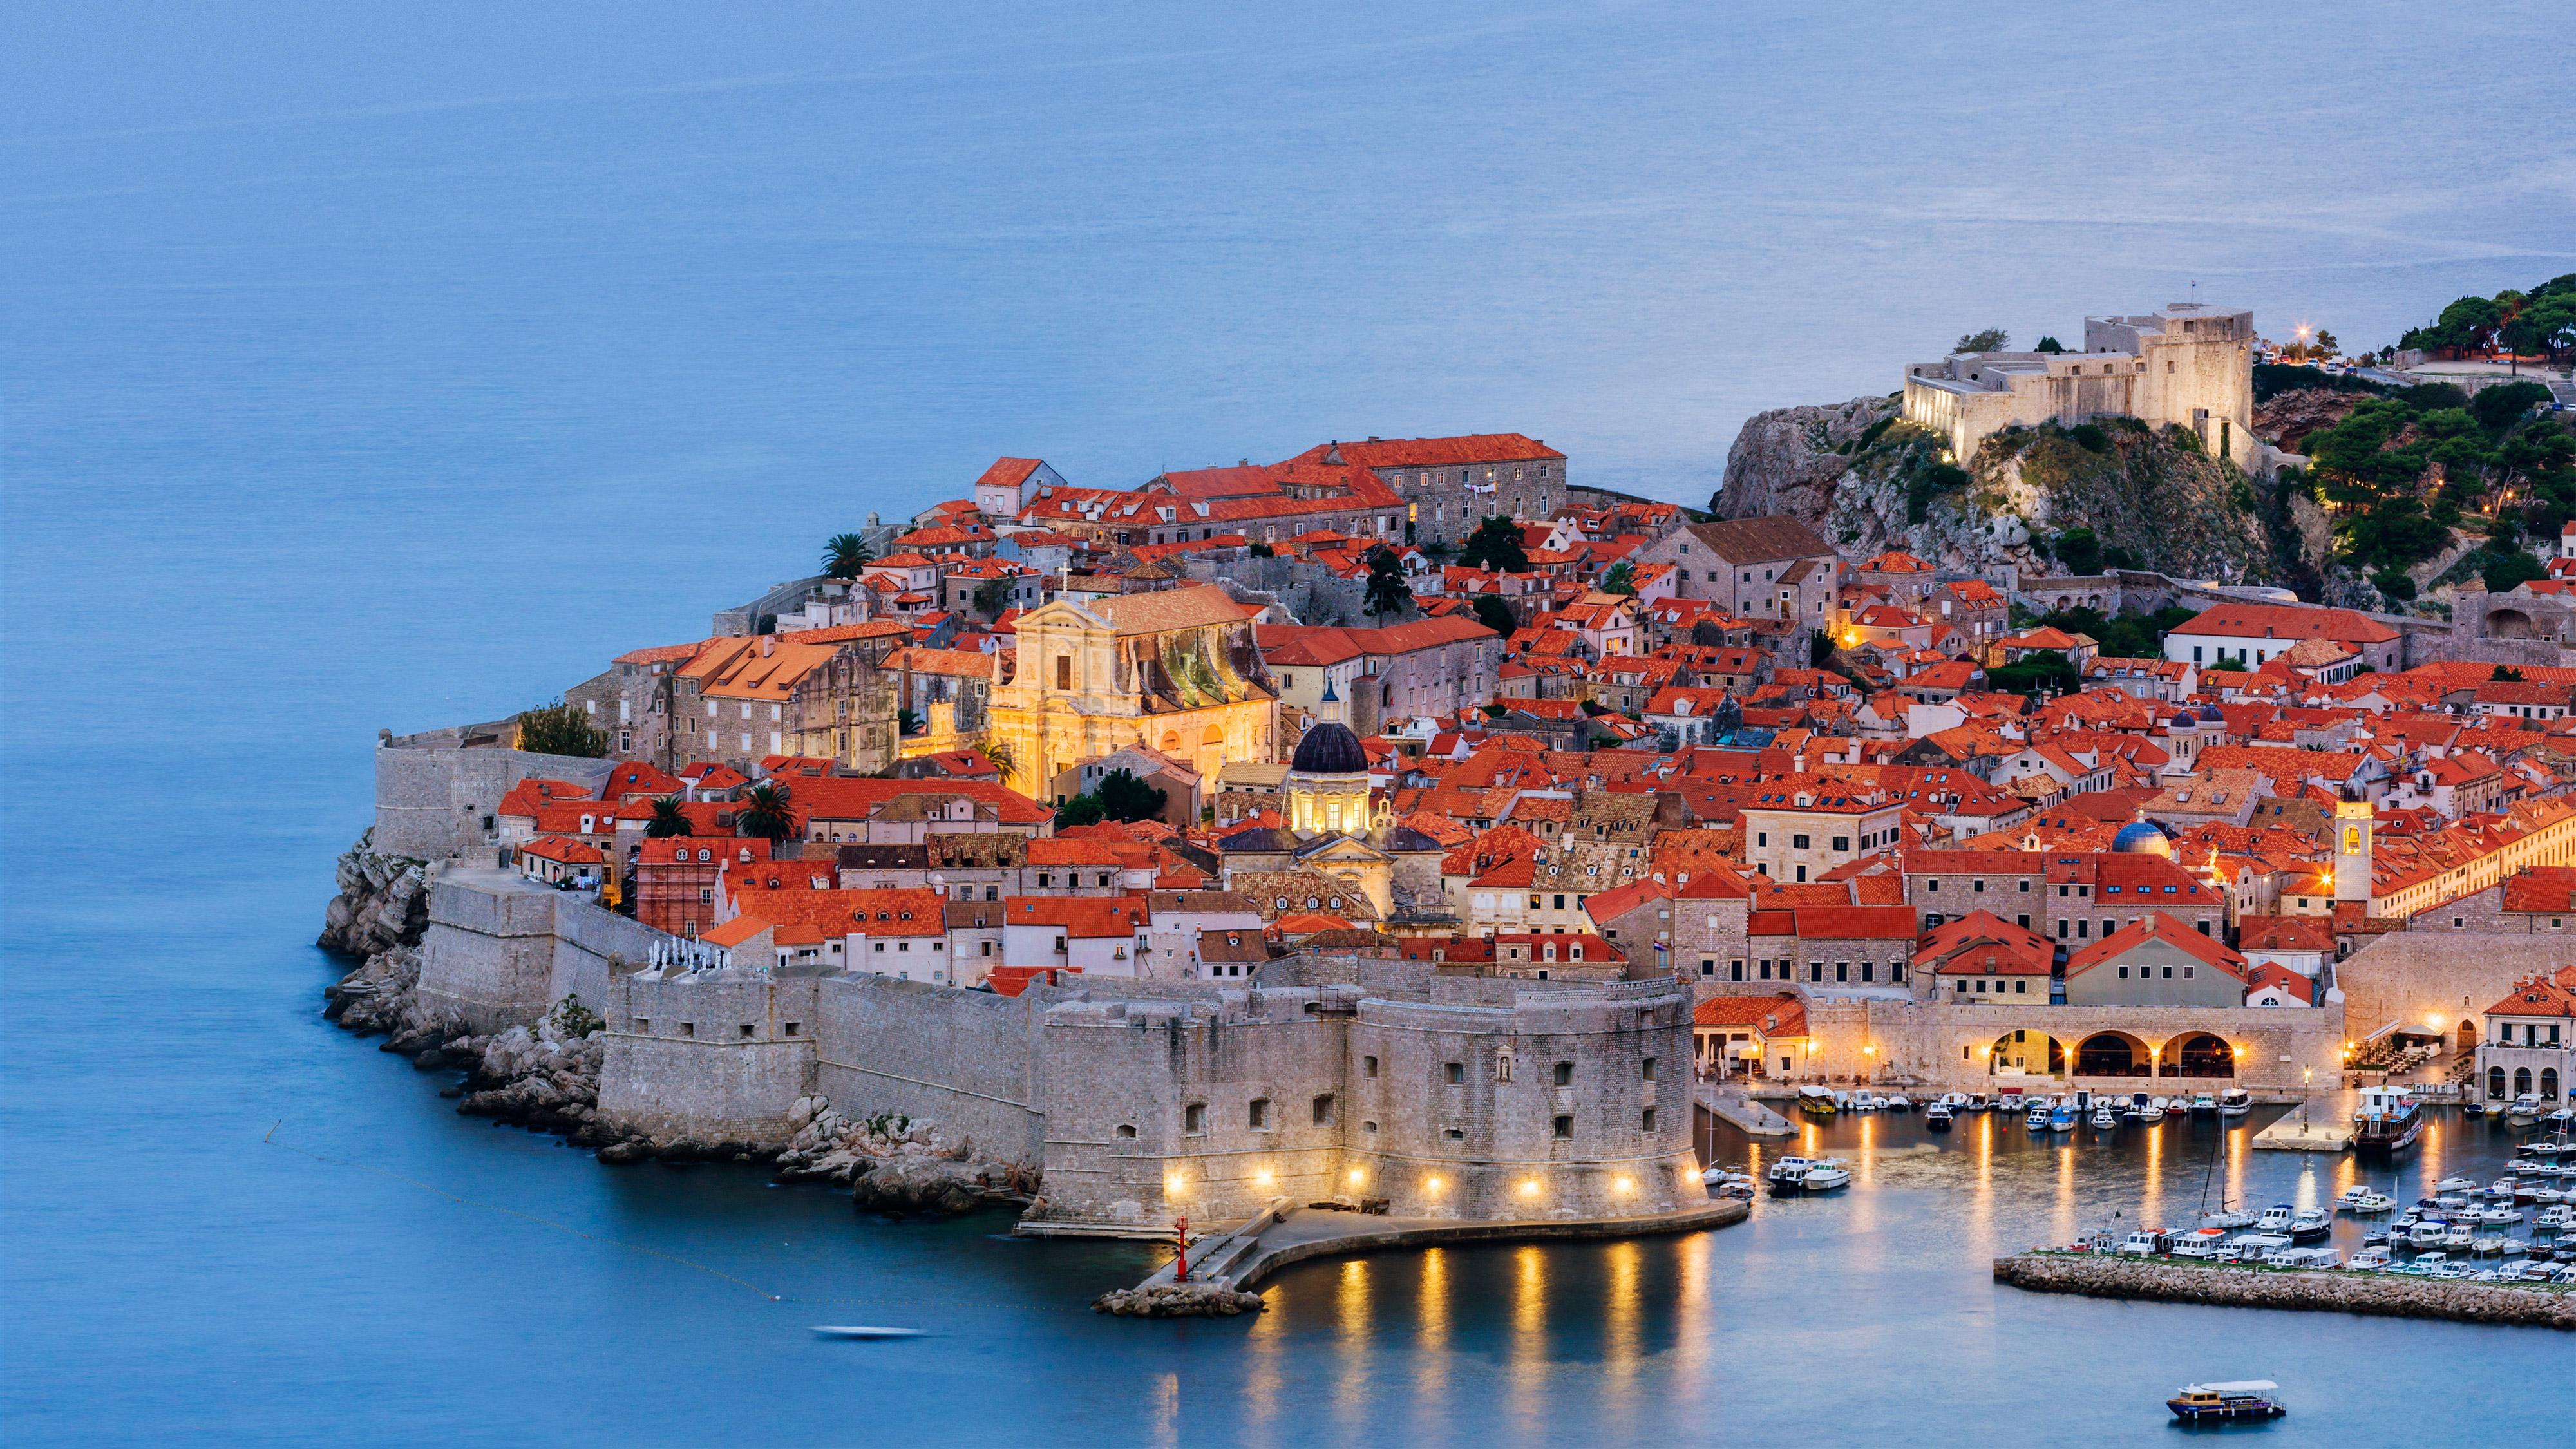 The old town of Dubrovnik, Croatia by Jeremy Woodhouse